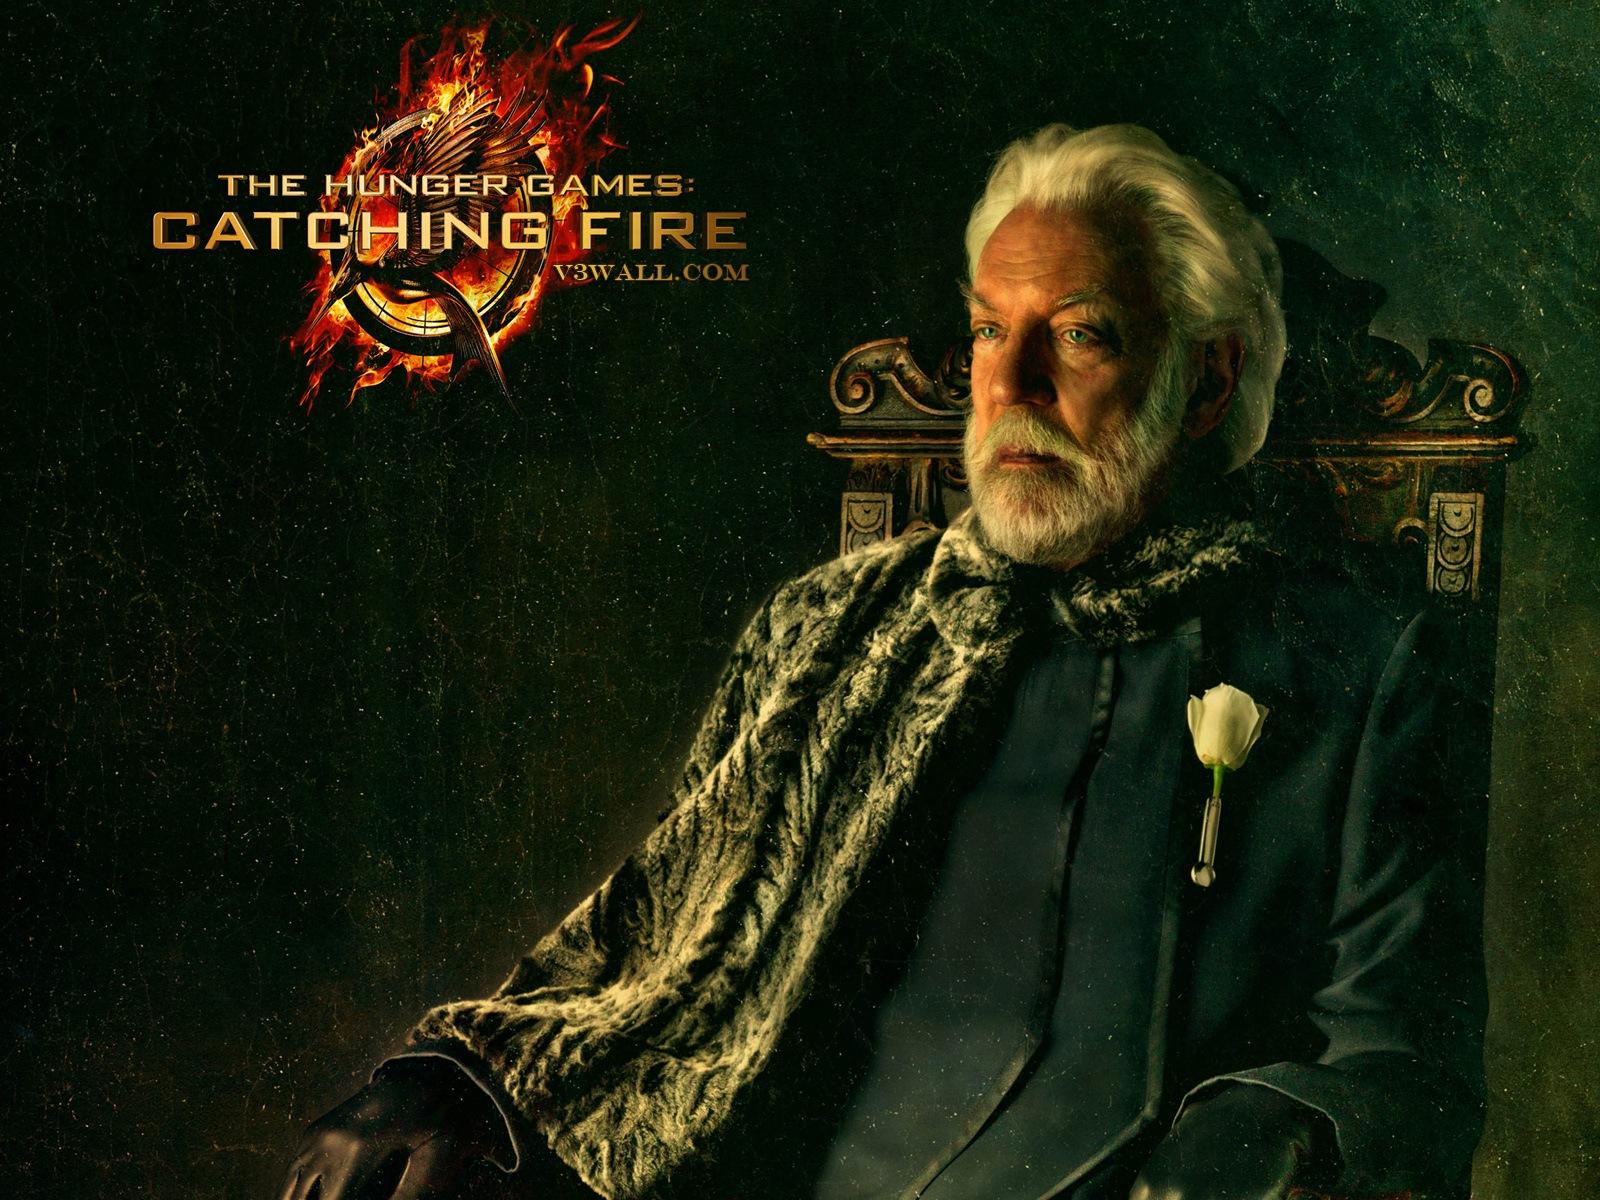 The Hunger Games: Catching Fire wallpapers HD #3 - 1600x1200